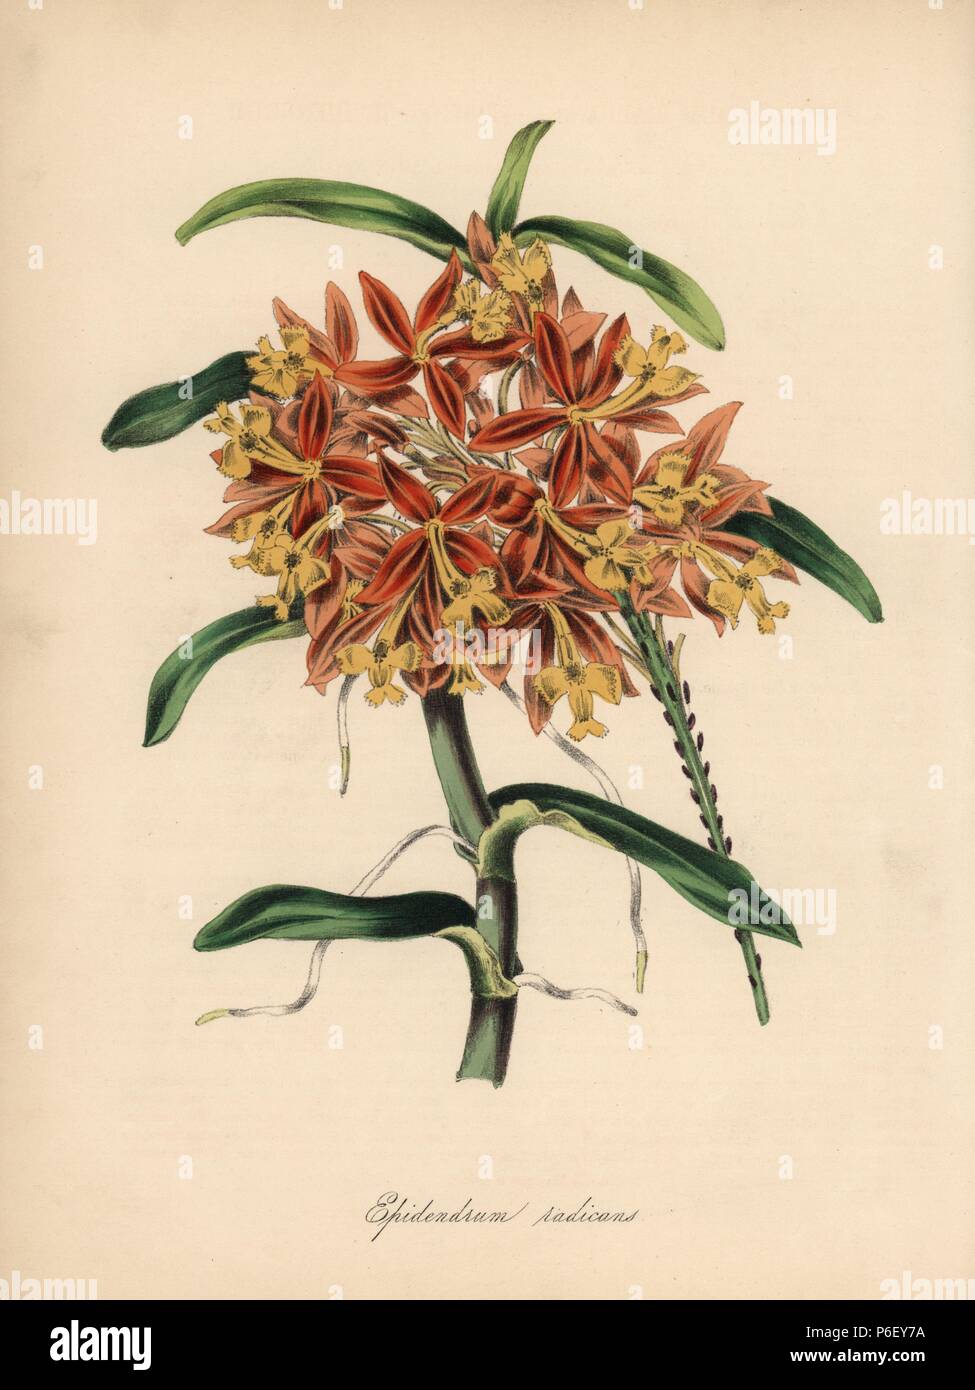 Rooting epidendrum or fire-star orchid, Epidendrum radicans. Handcoloured zincograph by C. Chabot drawn by Miss M. A. Burnett from her 'Plantae Utiliores: or Illustrations of Useful Plants,' Whittaker, London, 1842. Miss Burnett drew the botanical illustrations, but the text was chiefly by her late brother, British botanist Gilbert Thomas Burnett (1800-1835). Stock Photo